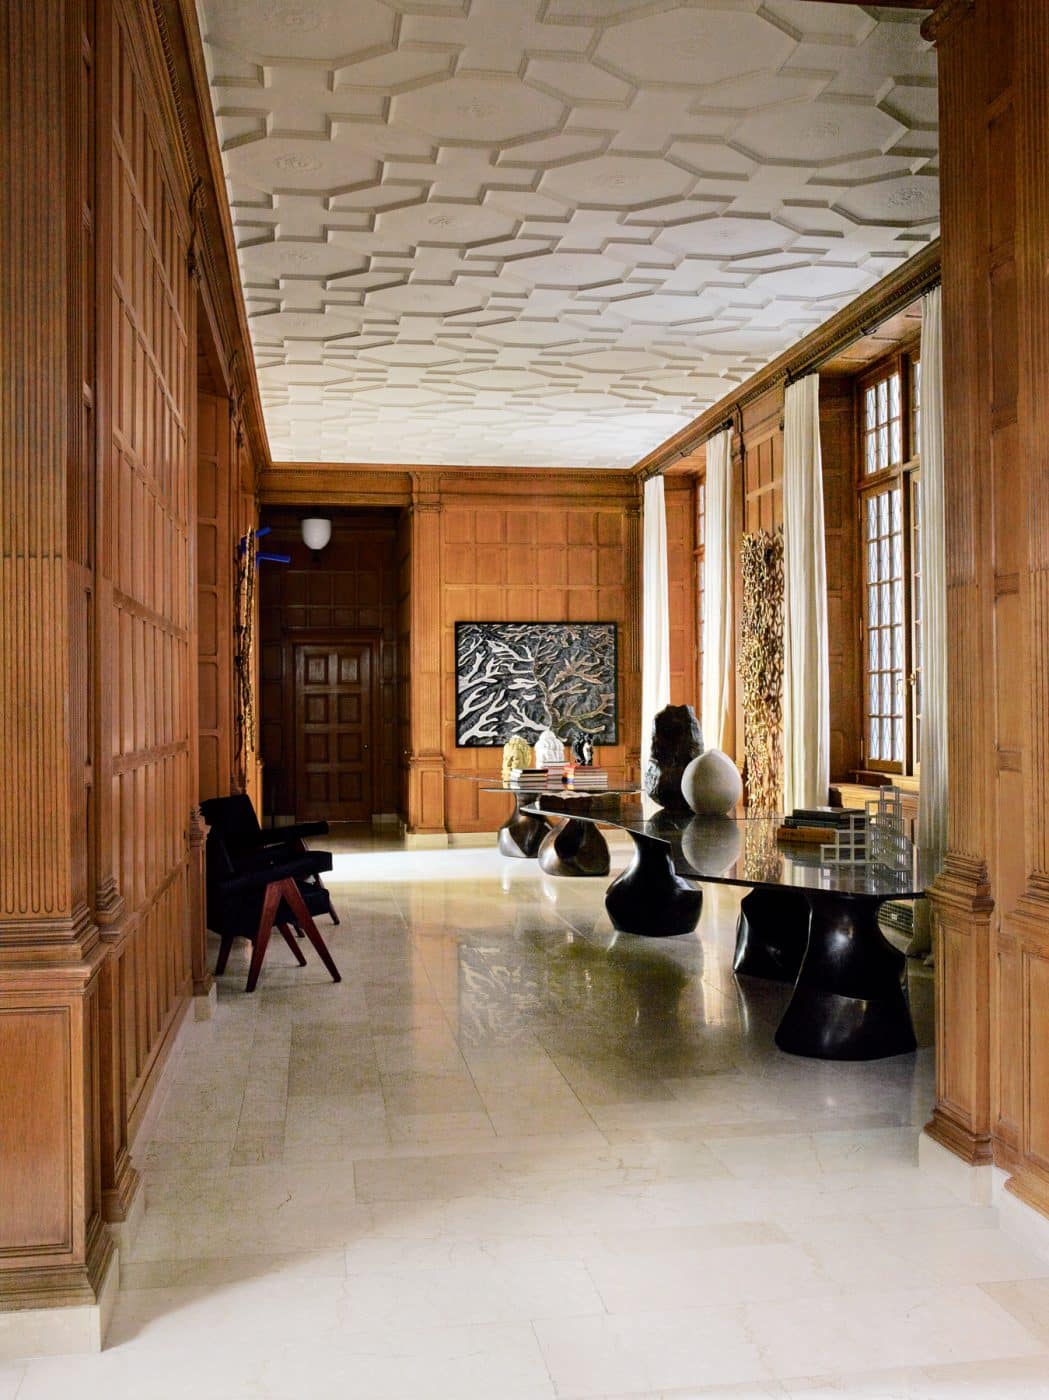 Entry hall designed by Hillman